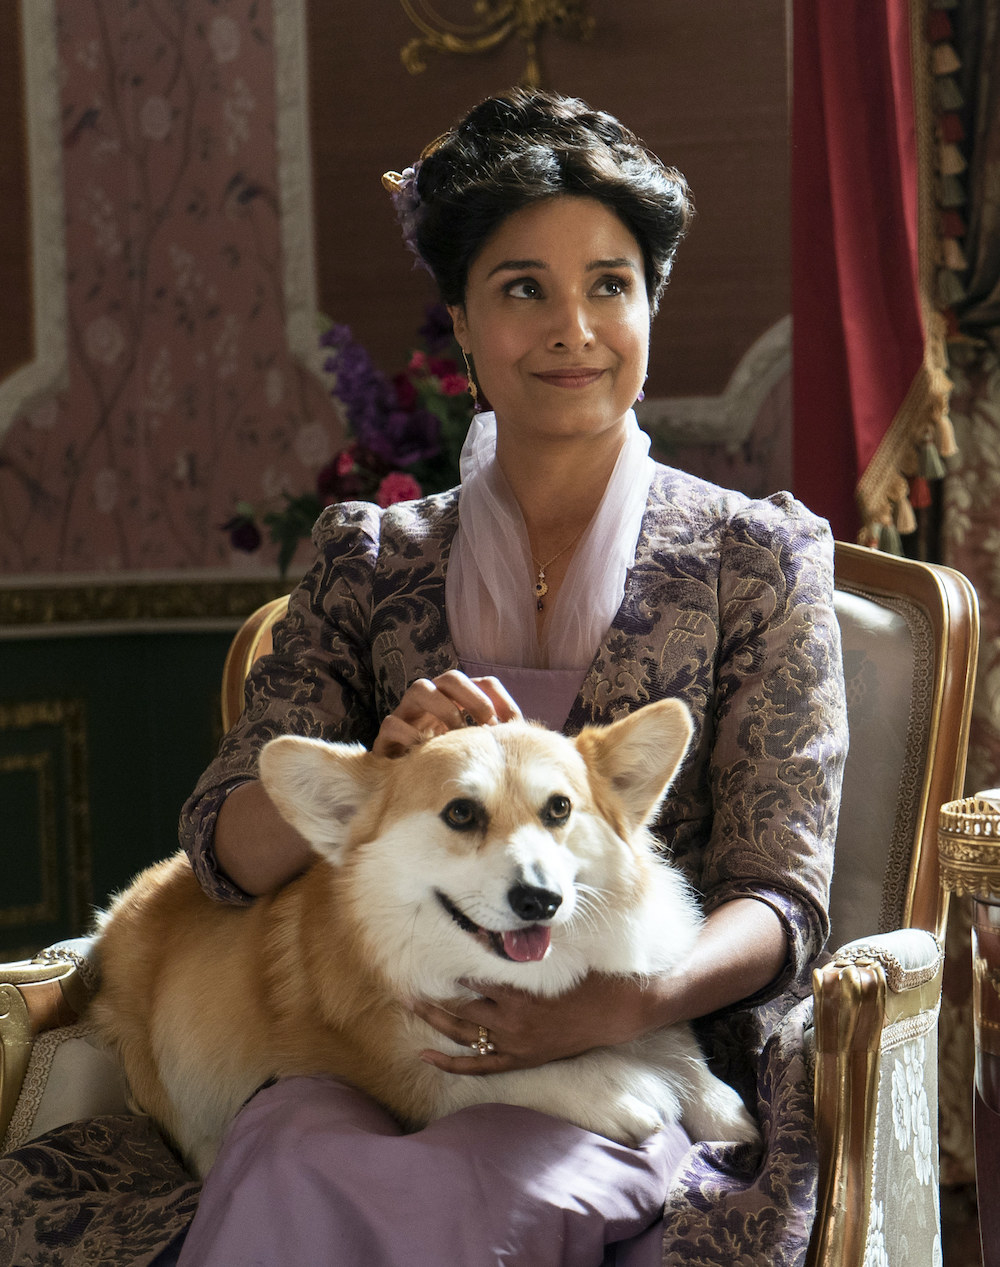 Mary sitting on a chair while petting a corgi sitting on her lap